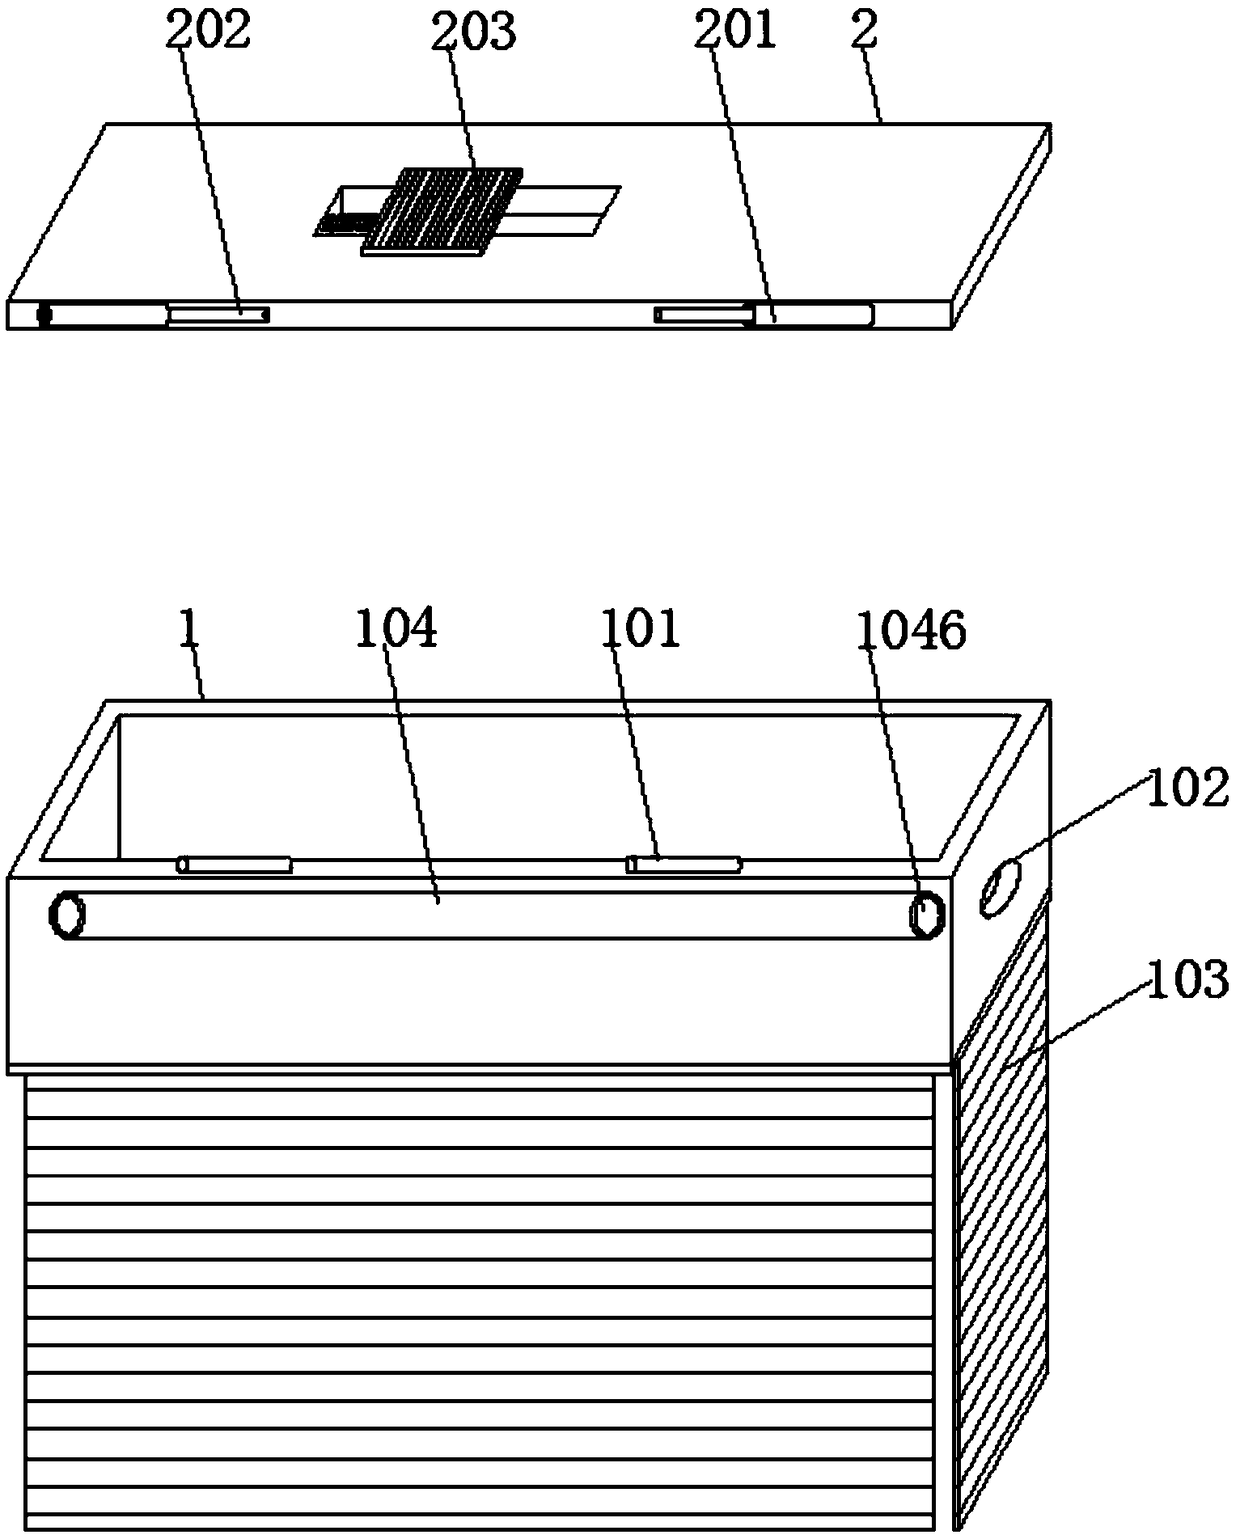 Self-adaption cigarette storage box with inner space size capable of being controlled